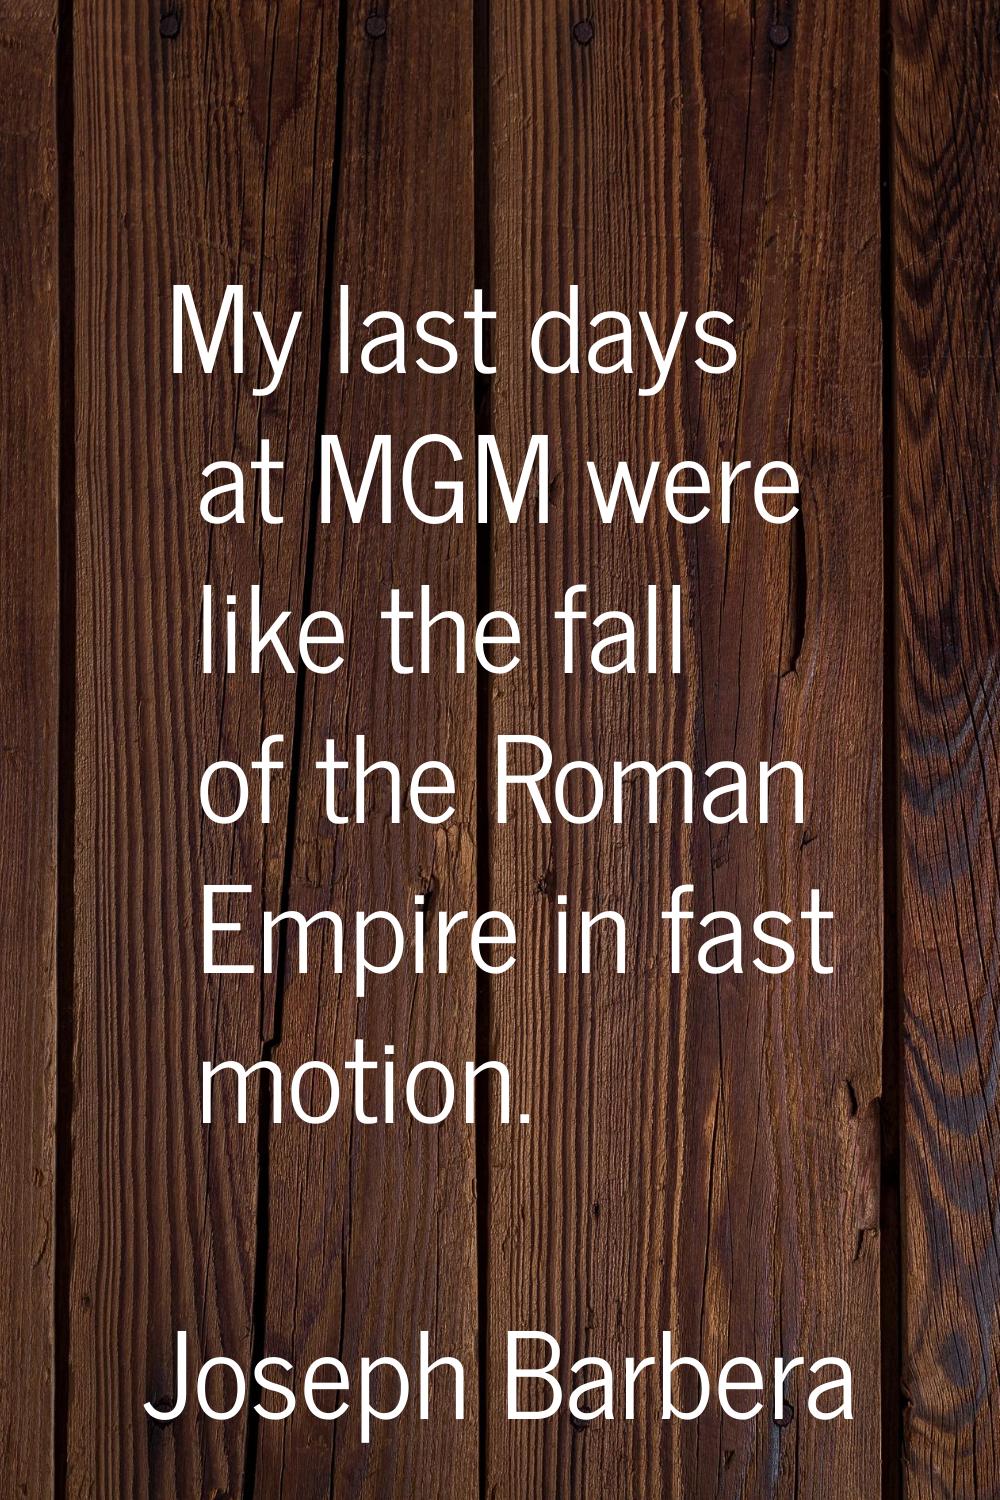 My last days at MGM were like the fall of the Roman Empire in fast motion.